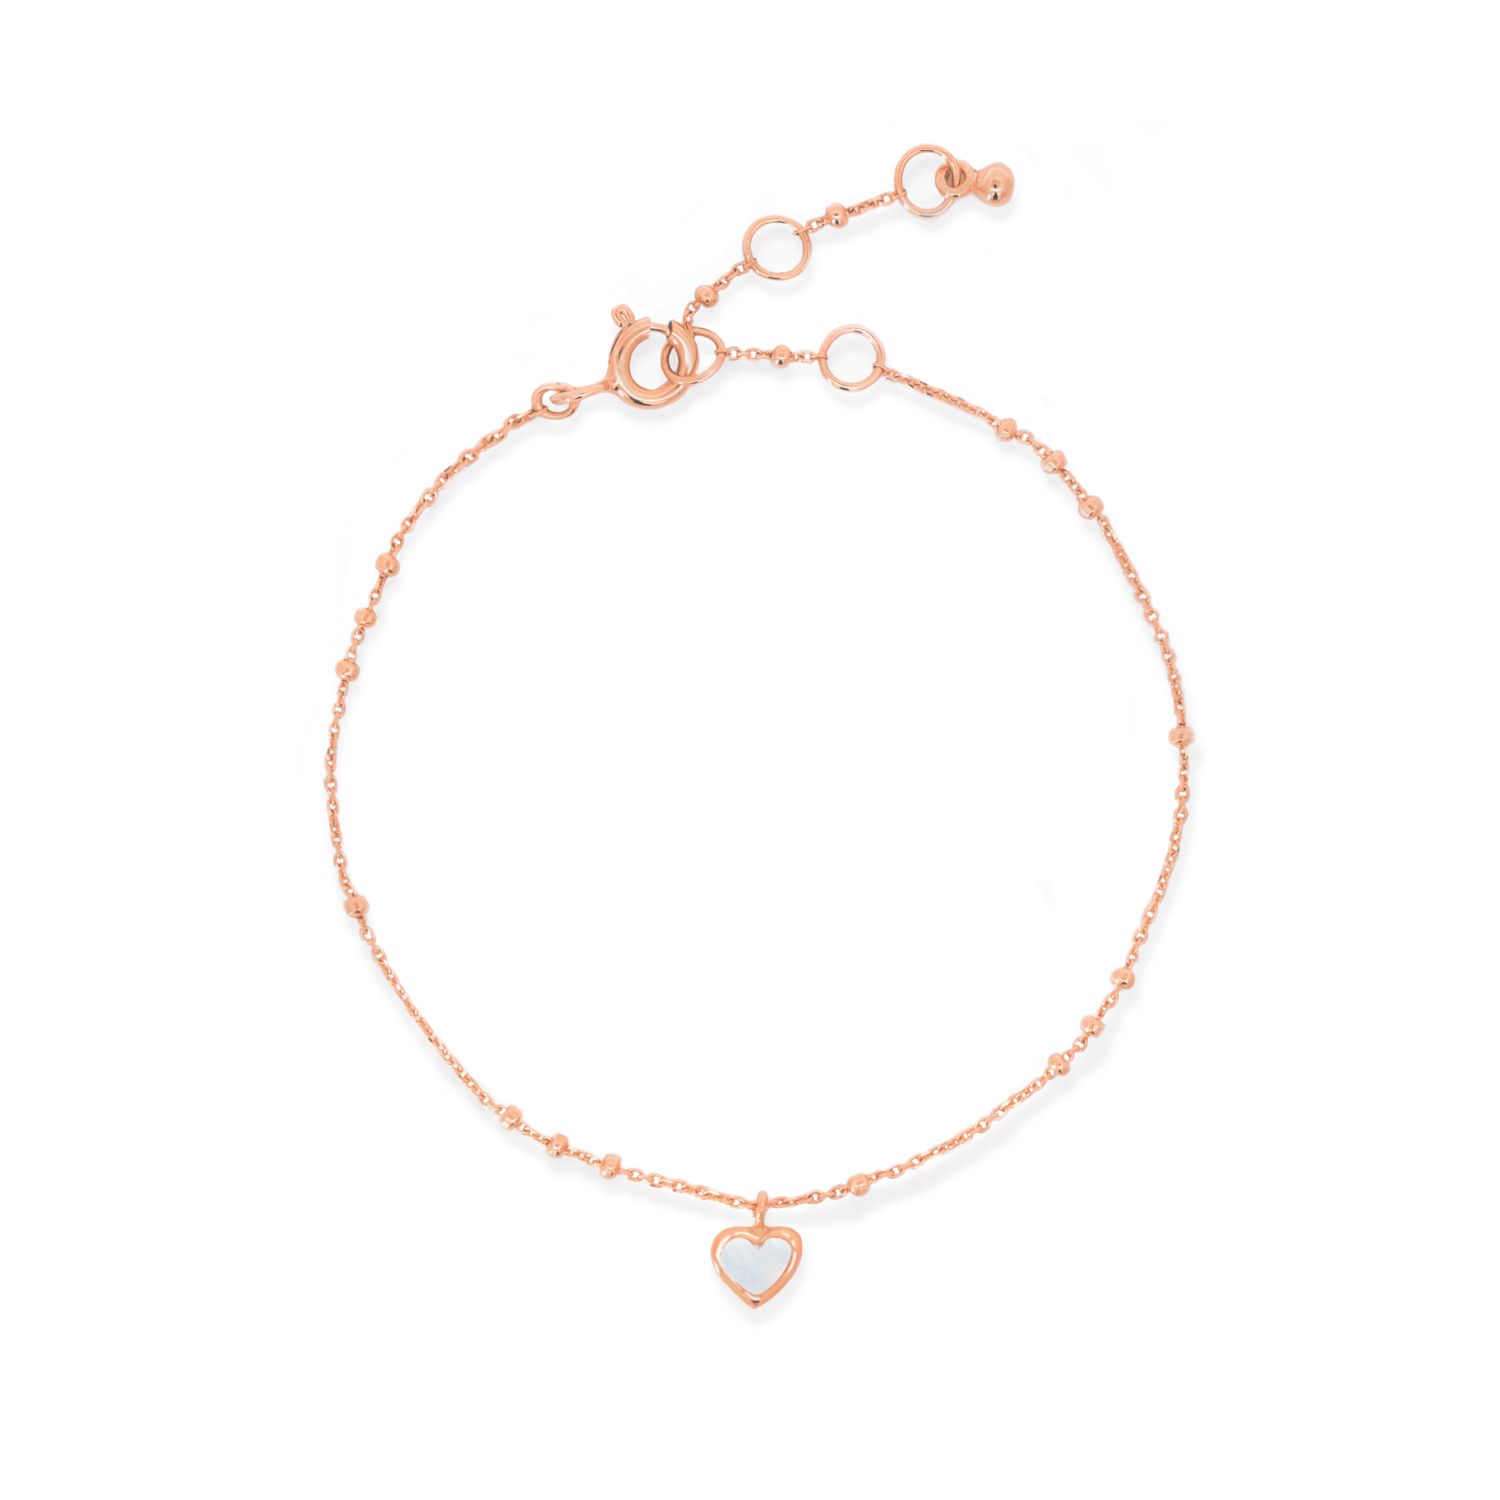 Charming and elegant bracelet in rose gold with moonstone pendant.